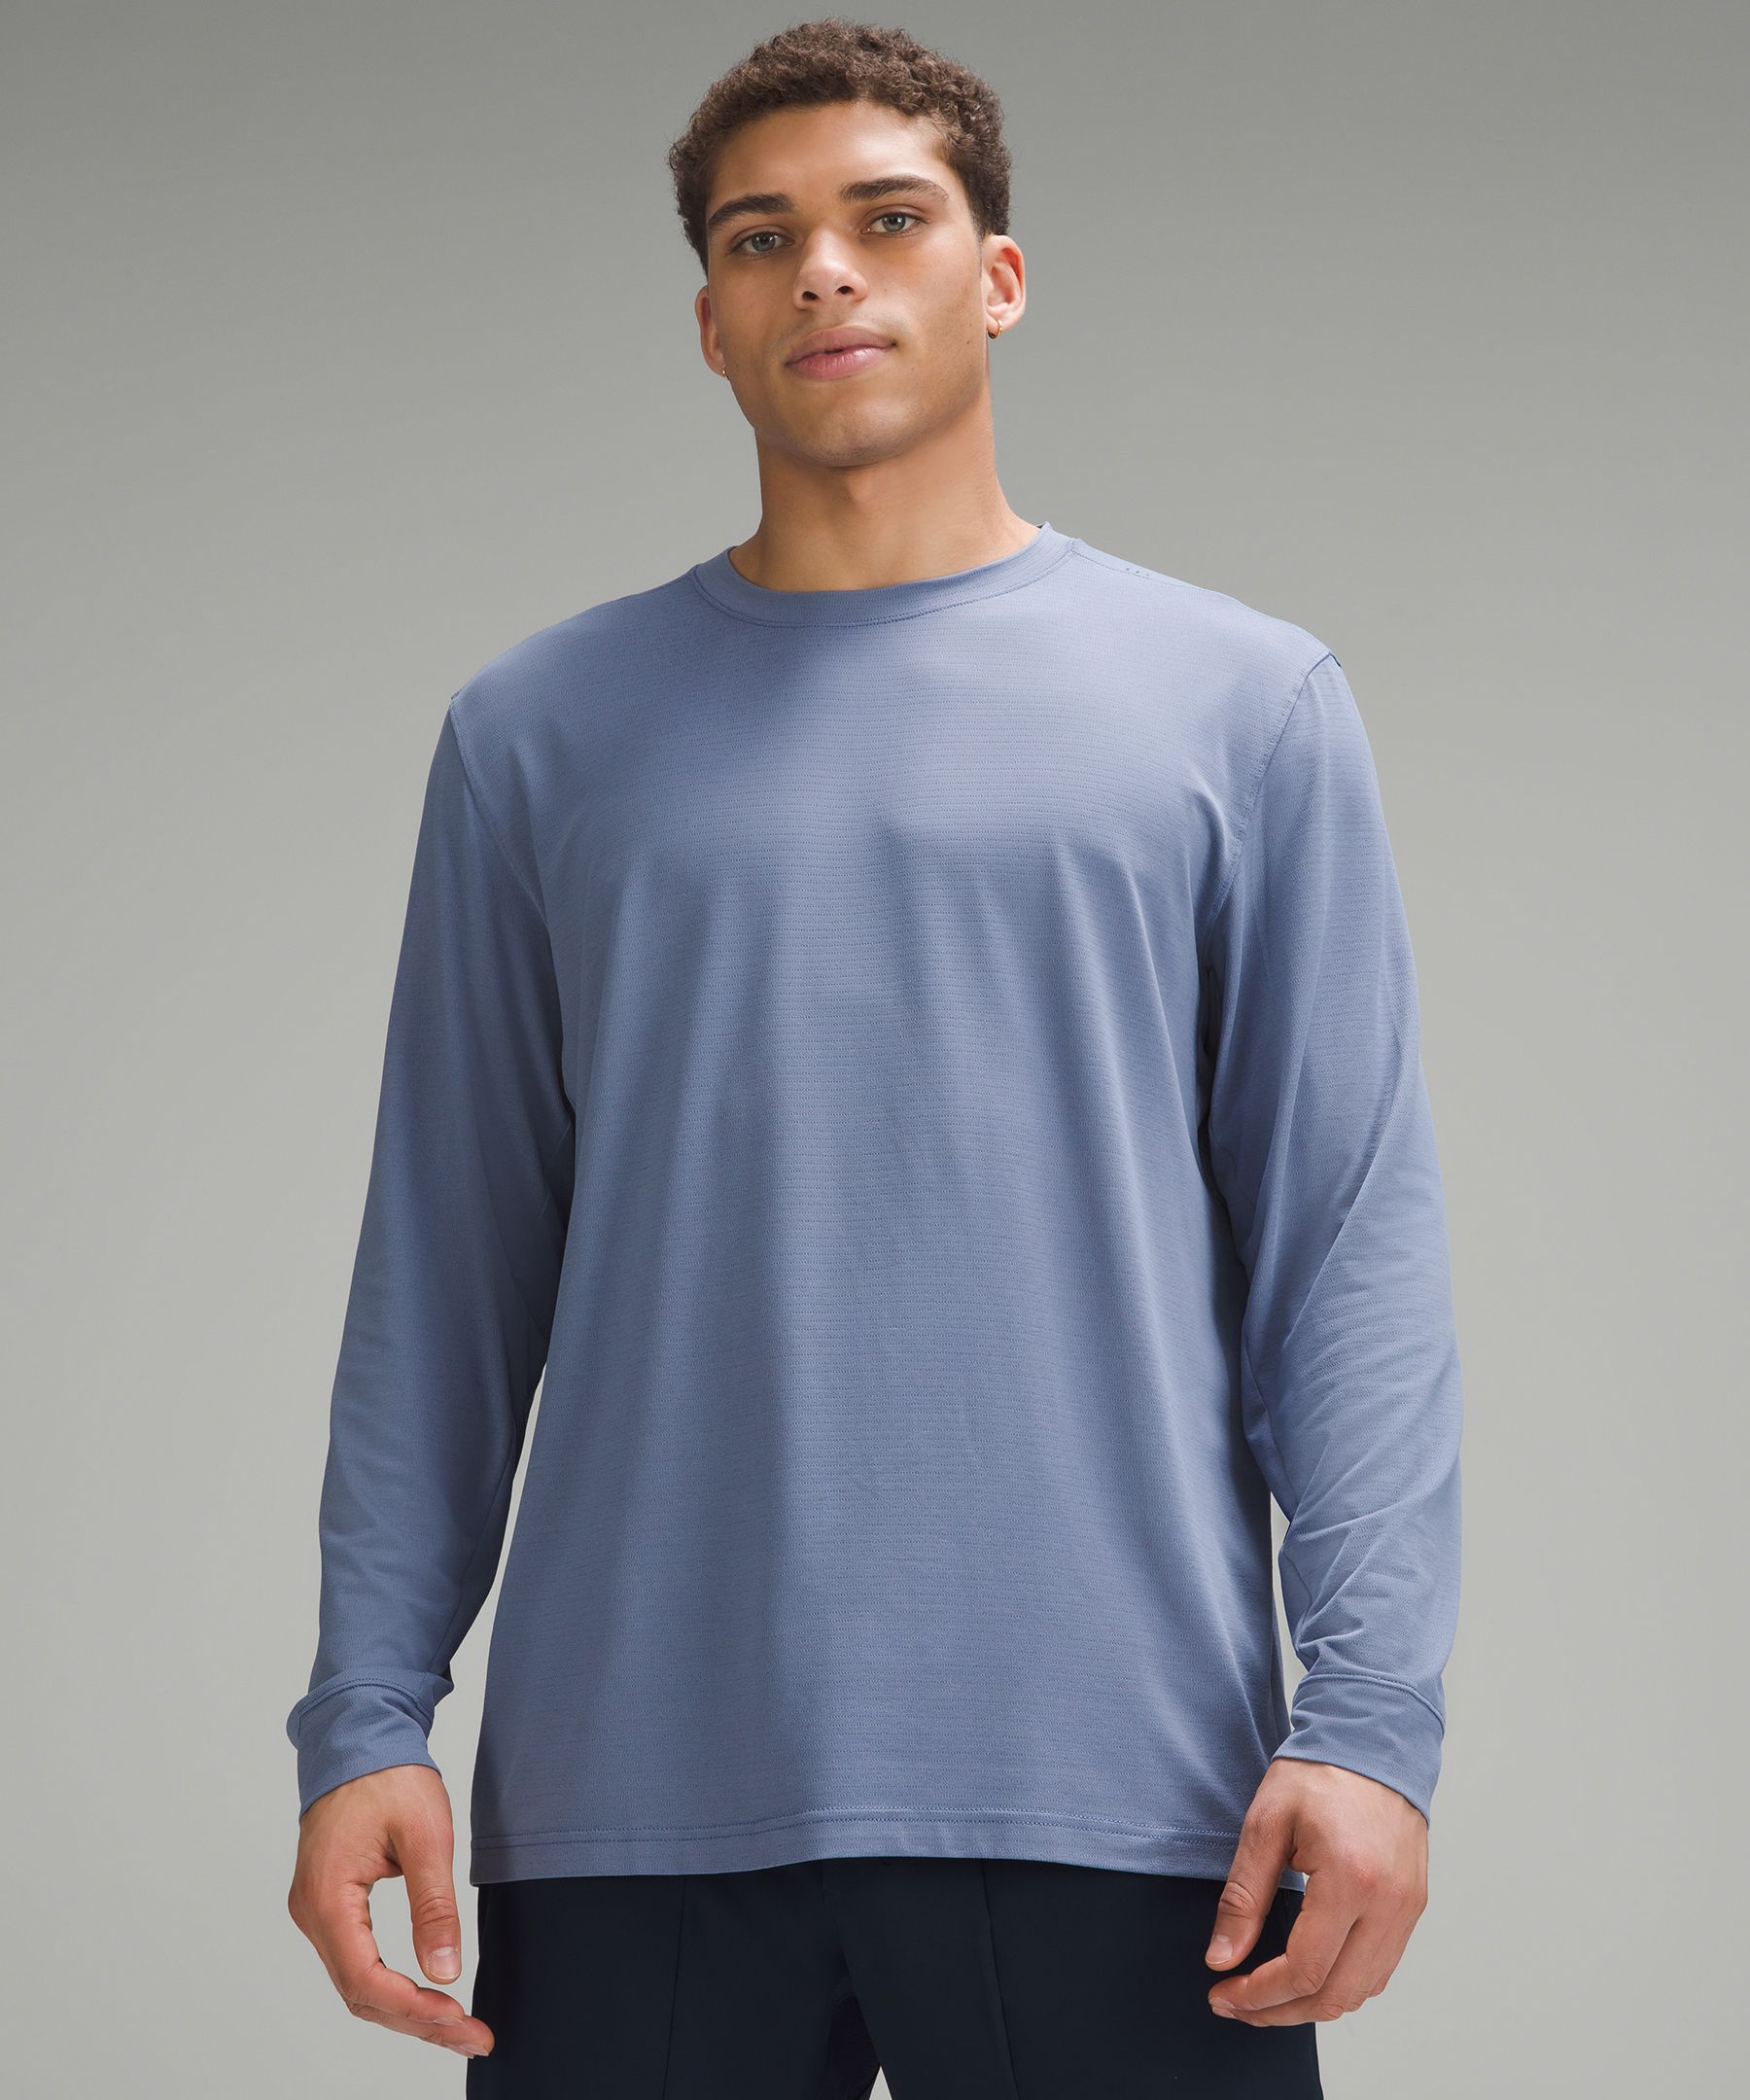 License to Train Relaxed-Fit Long-Sleeve Shirt